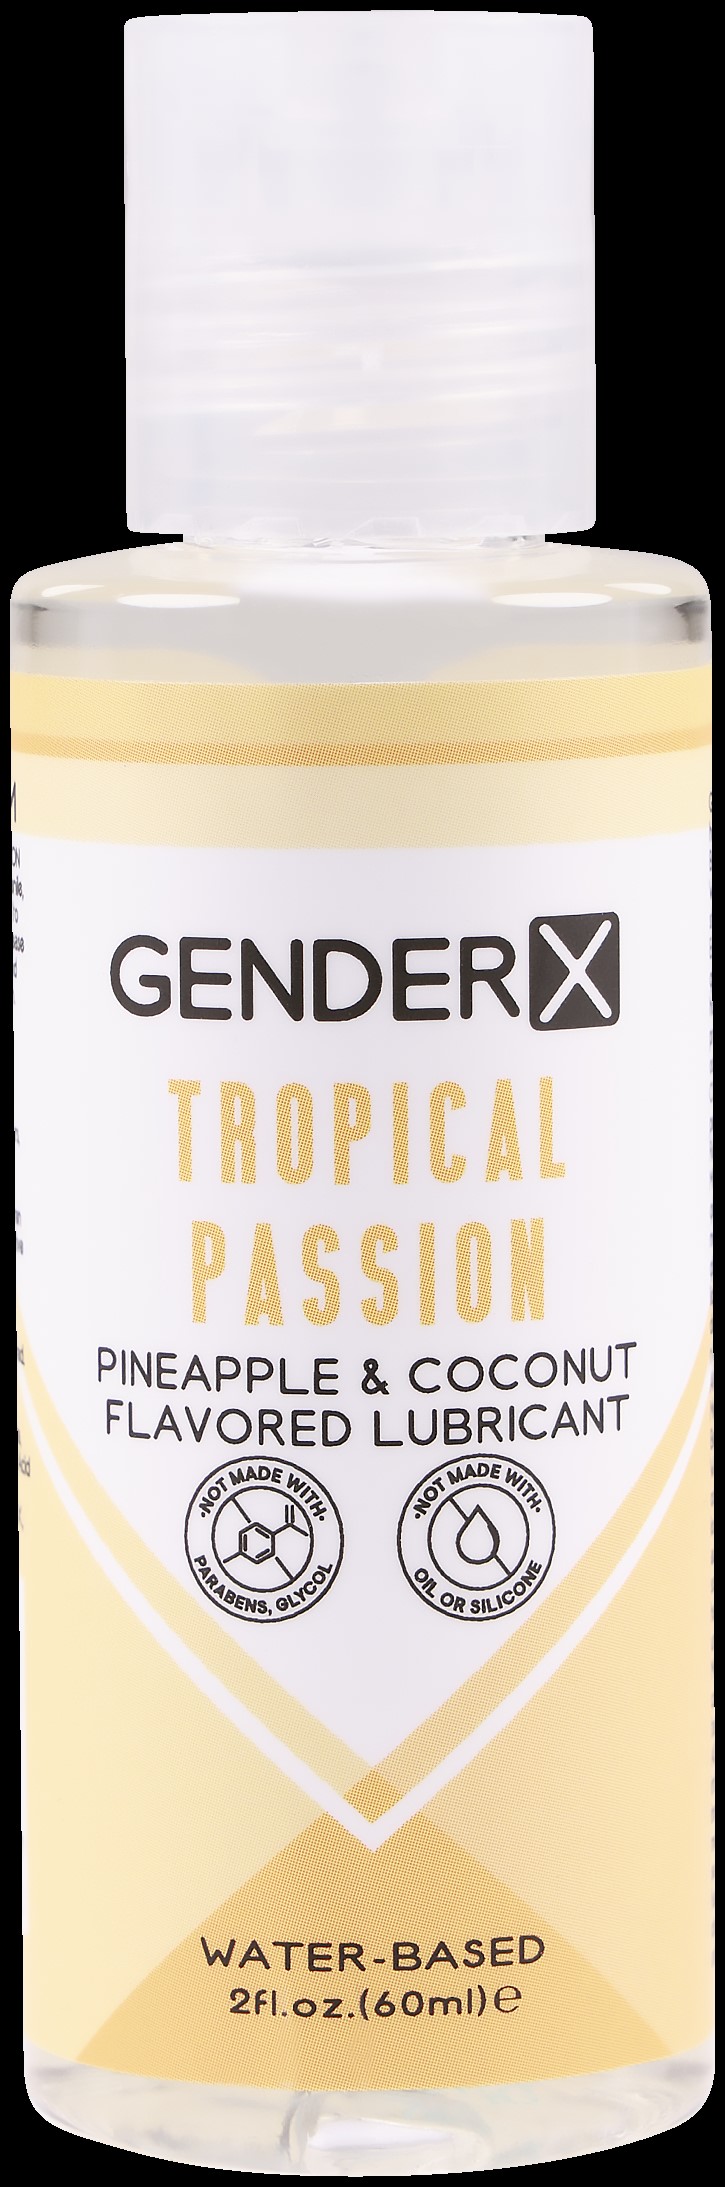 TROPICAL PASSION FLAVORED LUBE - 2.OZ